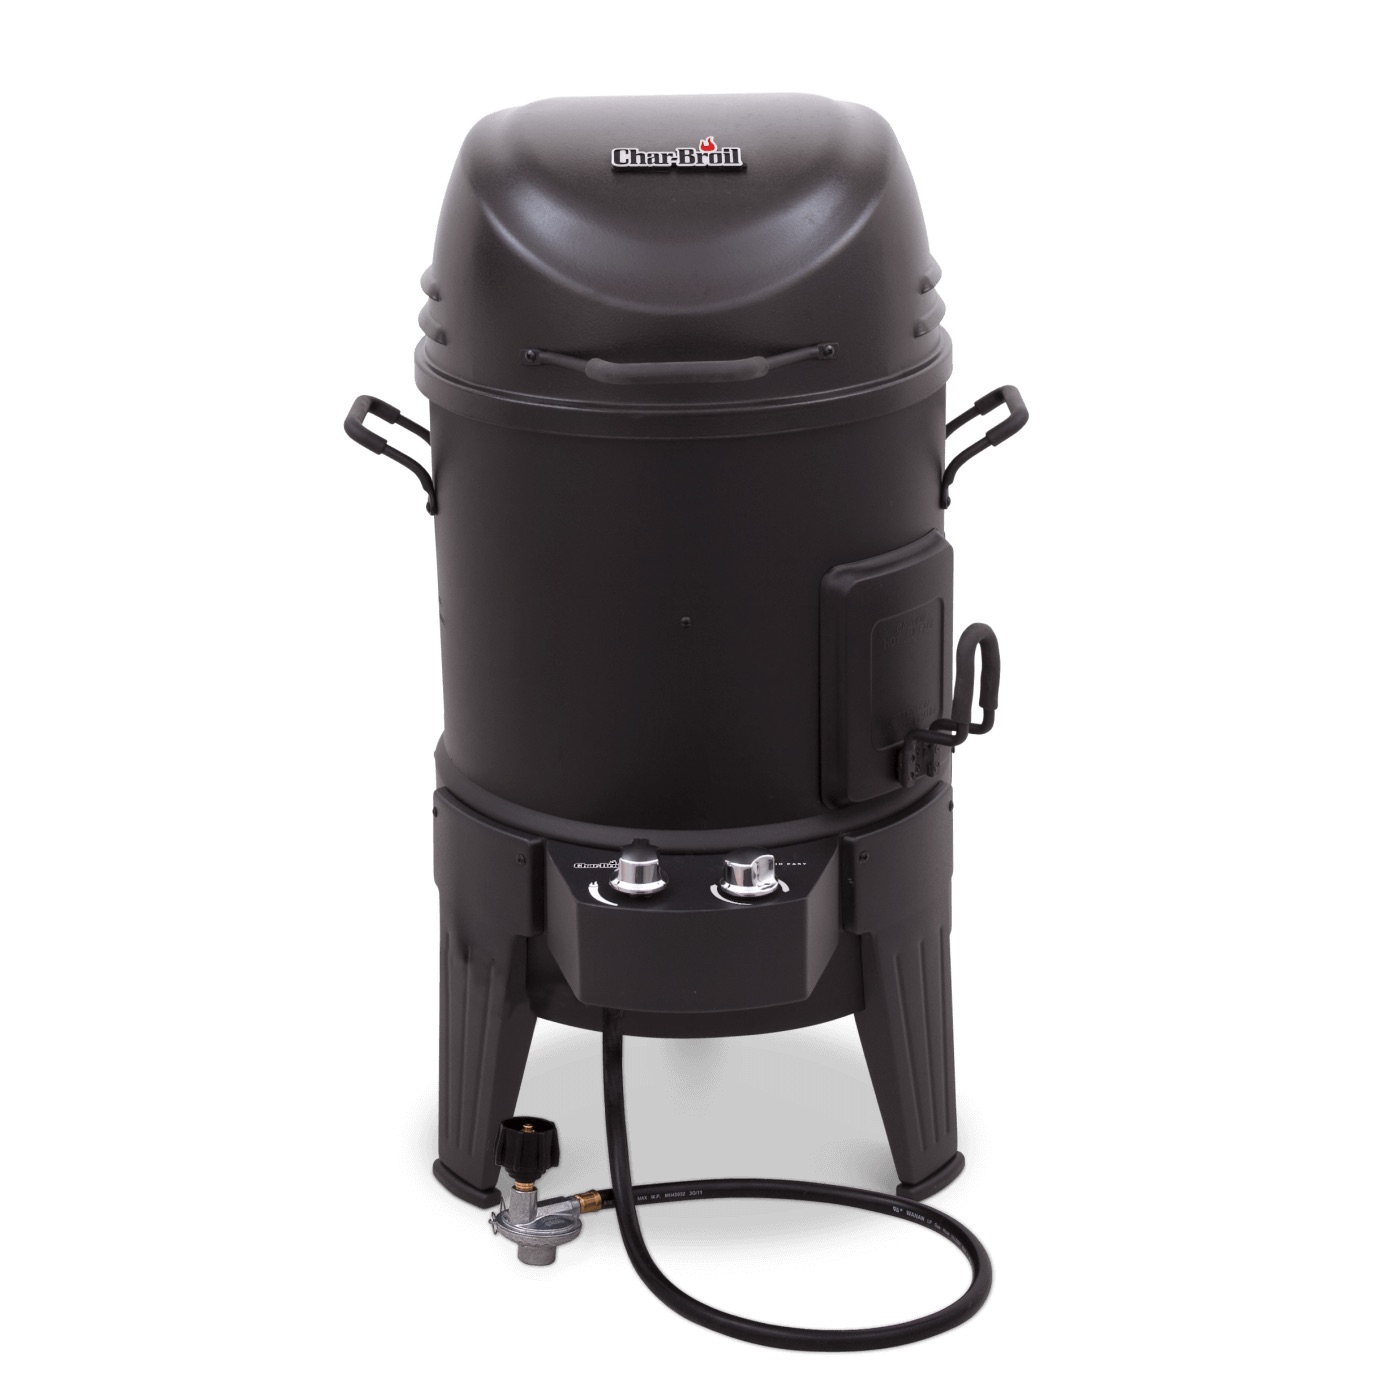 CHARBROIL The Big Easy 3 in 1 Grill